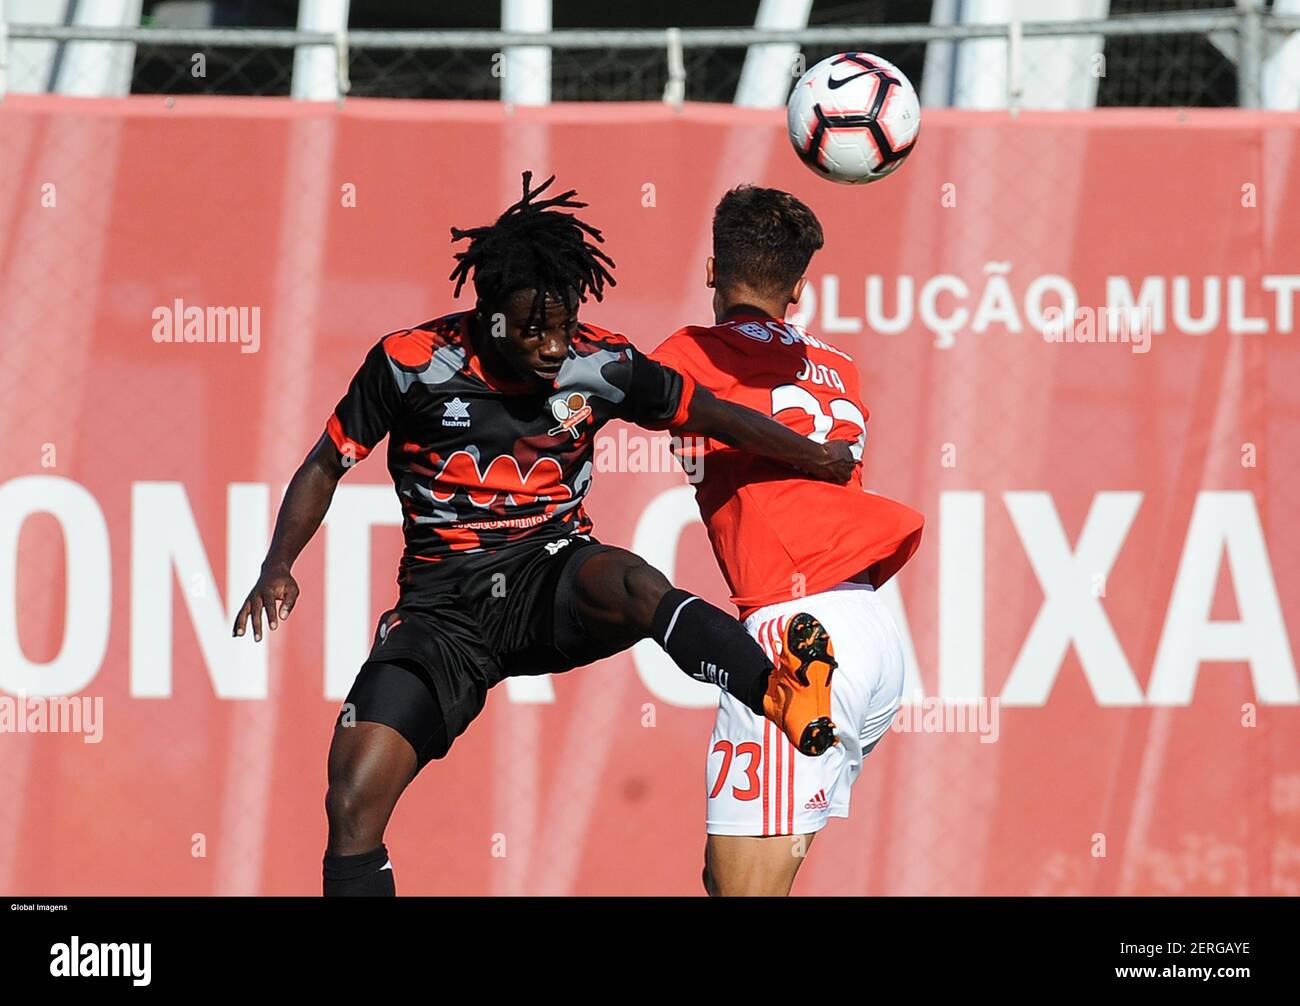 Seixal, 08/11/2018 - SL Benfica b received this afternoon the LeixÃµes SC  in Caixa Football Campus, in game to count for the 1st Matchday of the II  Liga 2018/2019. Jota (Ã lvaro